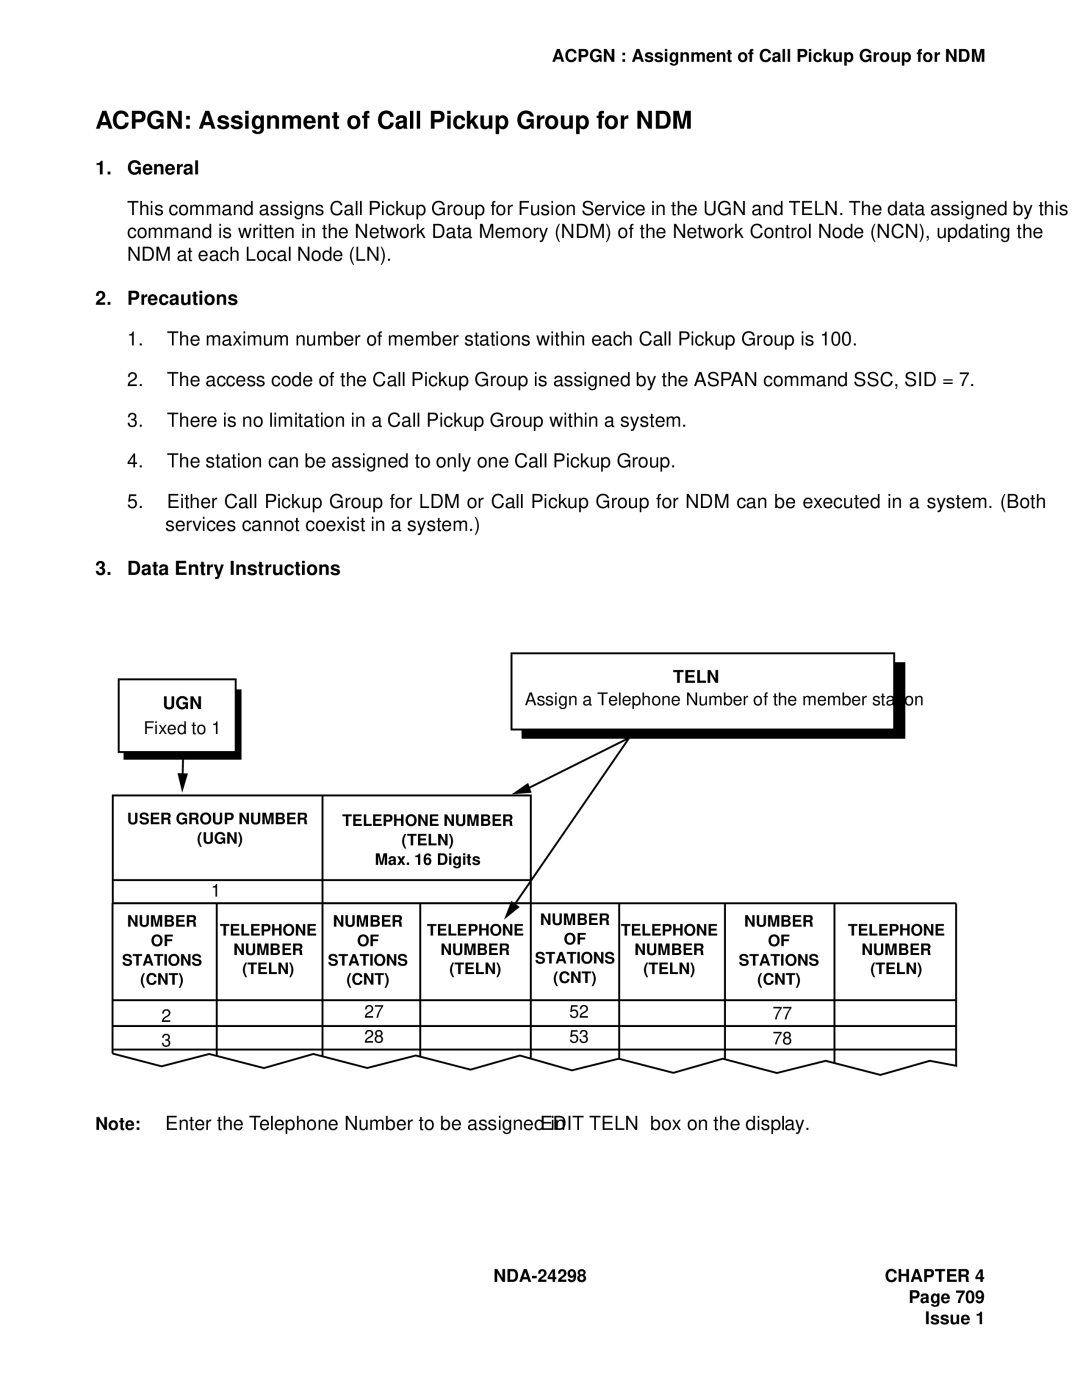 NEC NDA-24298 manual Acpgn Assignment of Call Pickup Group for NDM 